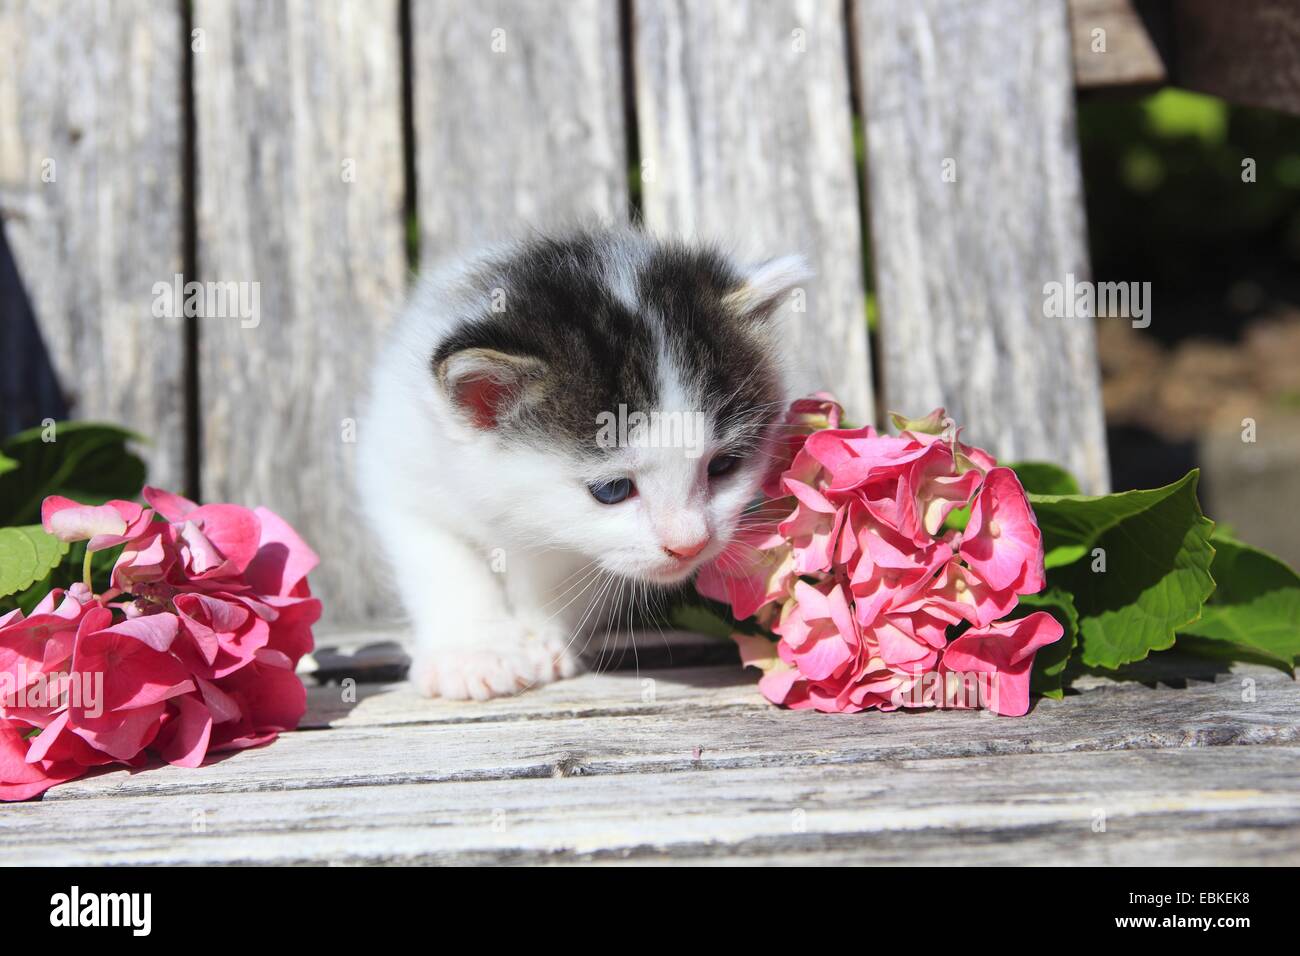 domestic cat, house cat (Felis silvestris f. catus), kitten sitting on a wooden garden chair surrounded by pink blossoms, Switzerland Stock Photo